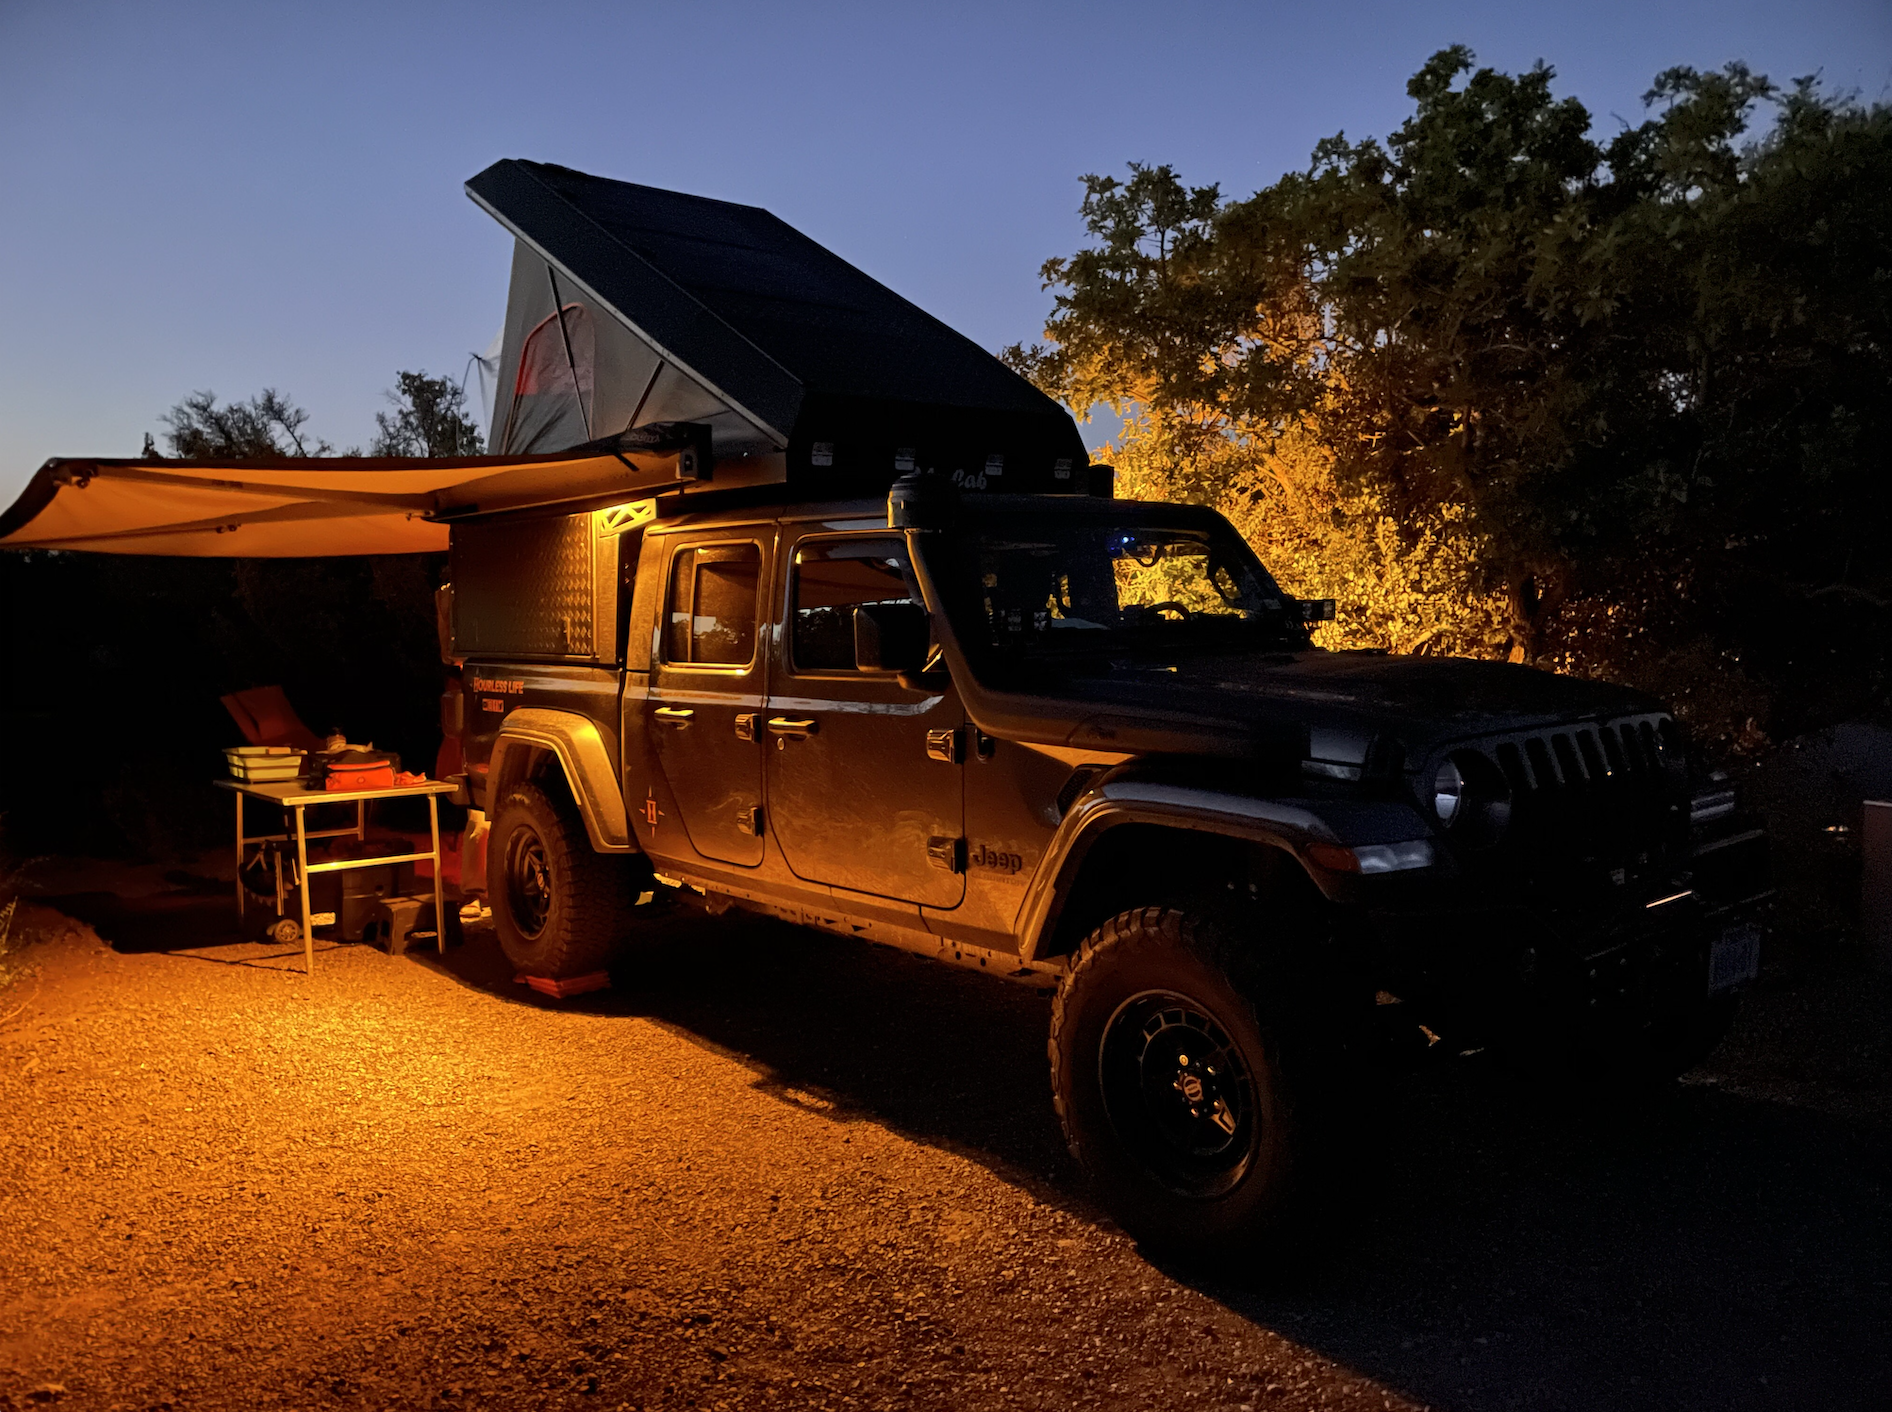 Hourless Life's rig: a jeep with a pop up tent. 